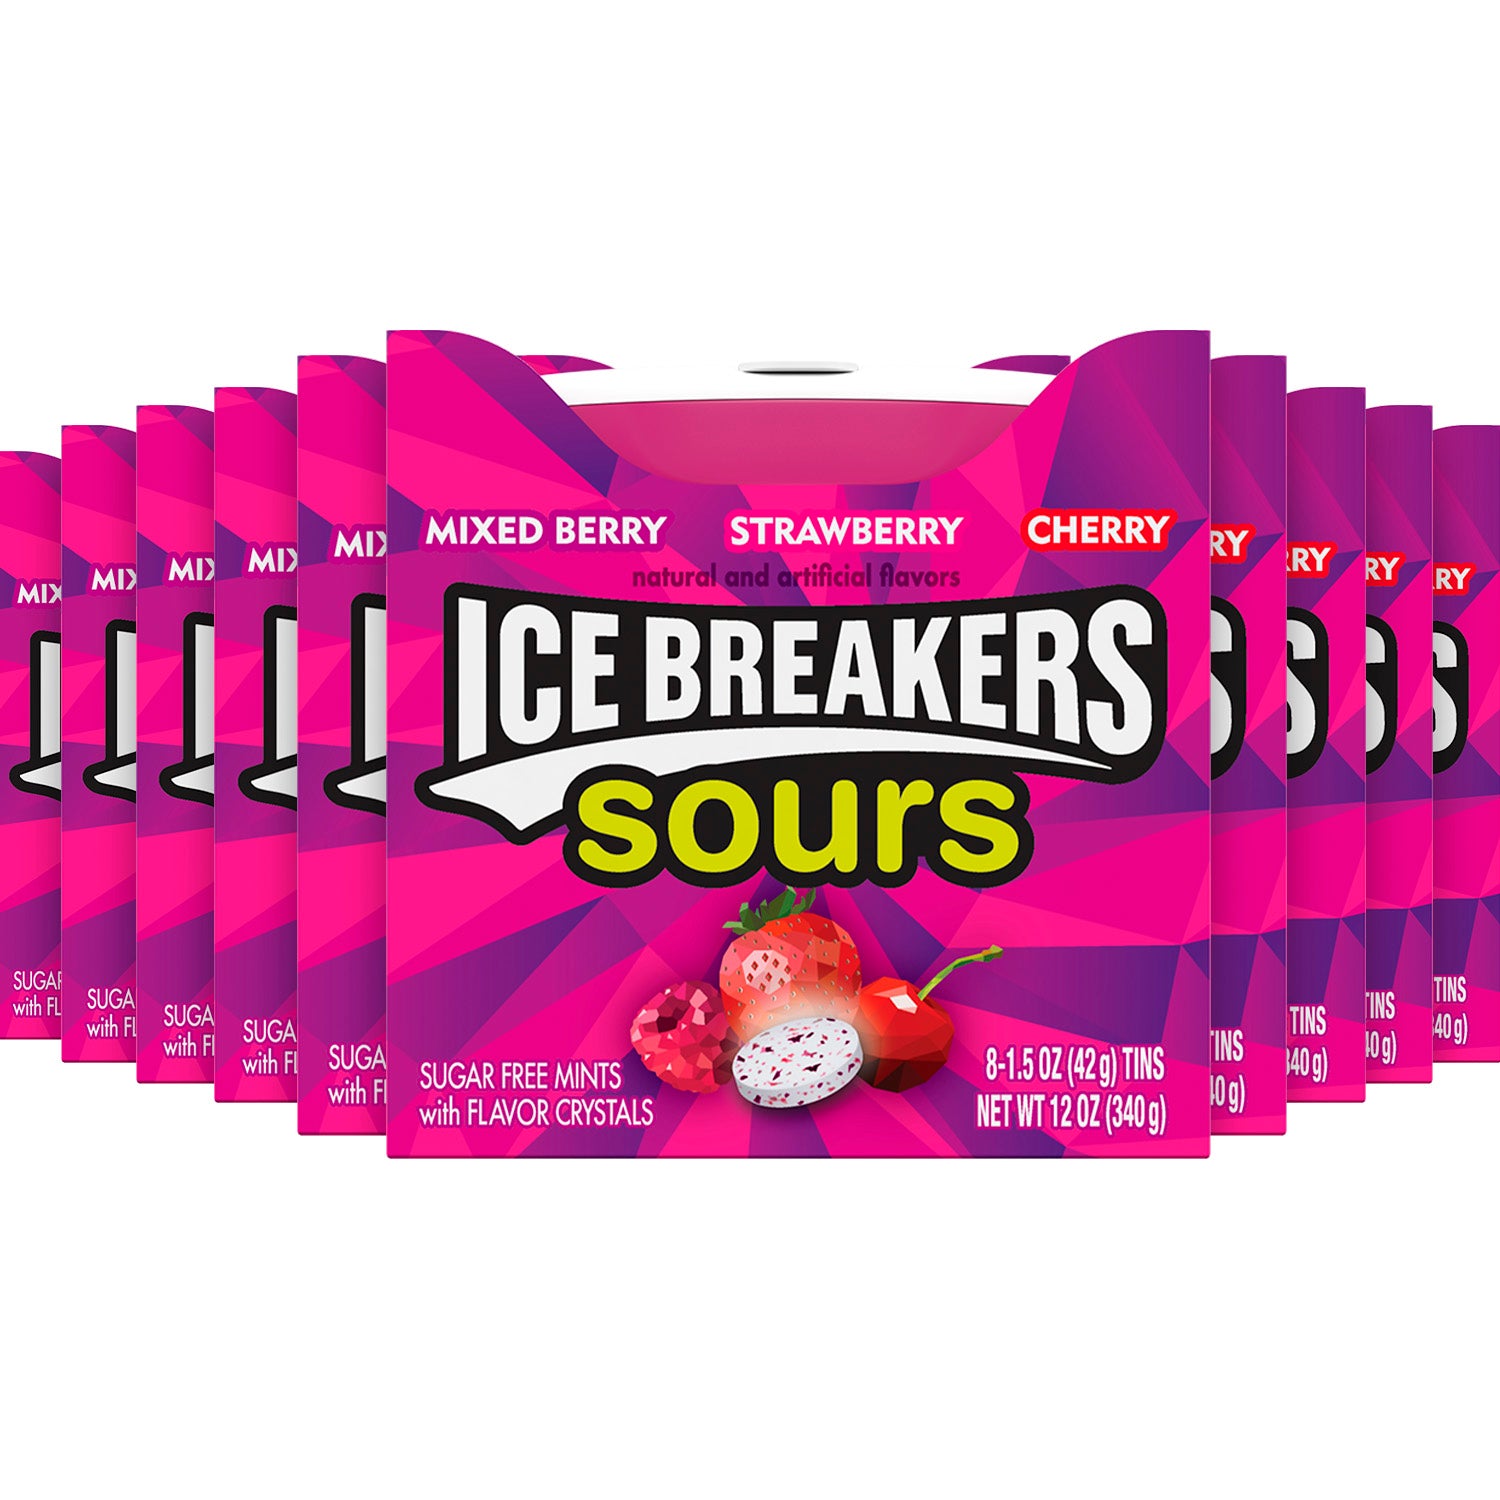 Shockers Sour Blackcurrant Chewy Bar 20's, Sweets, KR Sweets, Catalogue